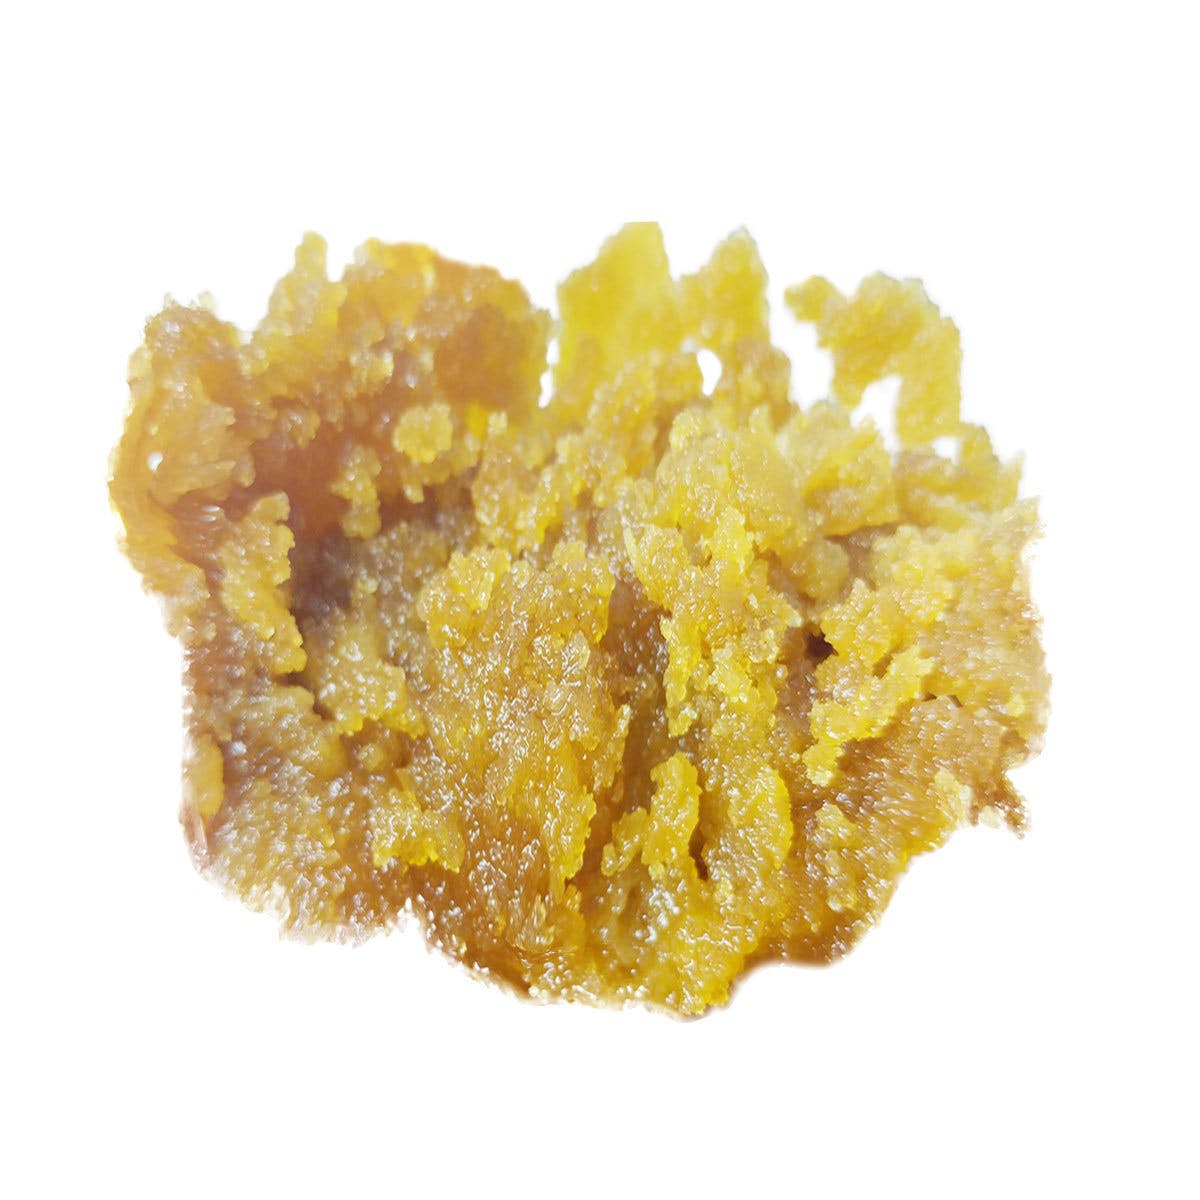 concentrate-made-products-1g-live-resin-purple-candy-kush